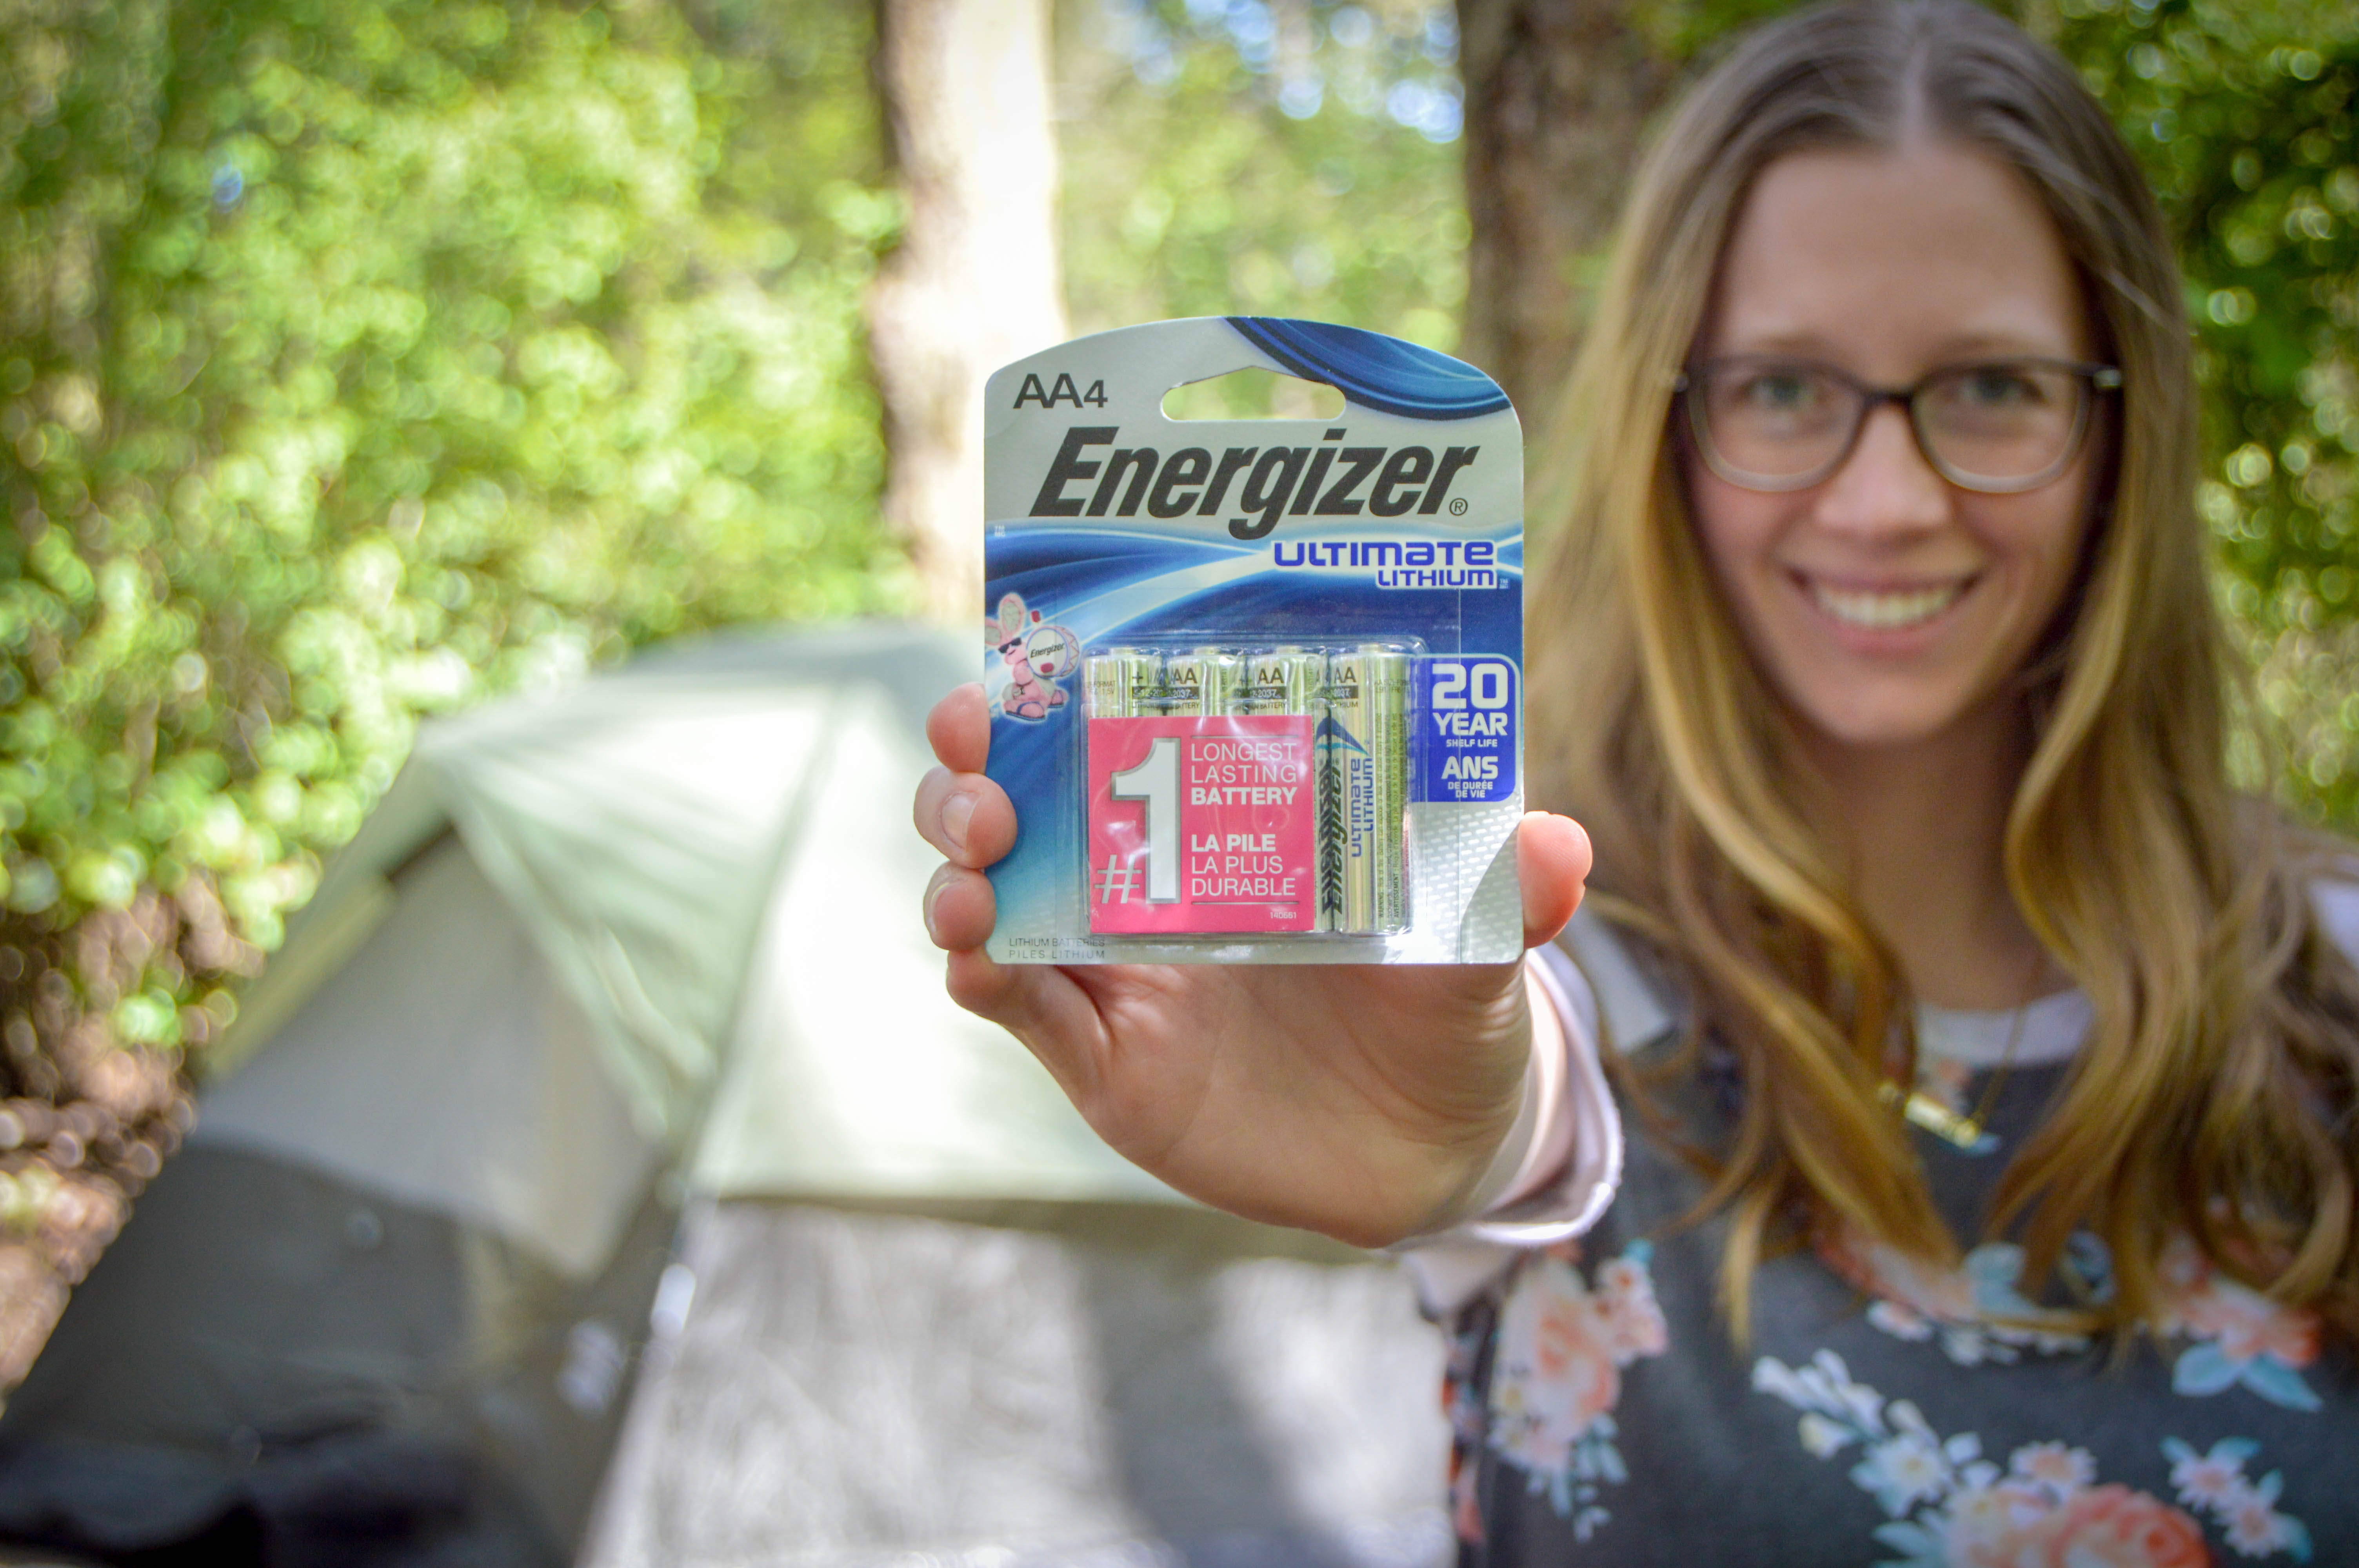 AA Energizer® Ultimate Lithium™ batteries for your flashlight